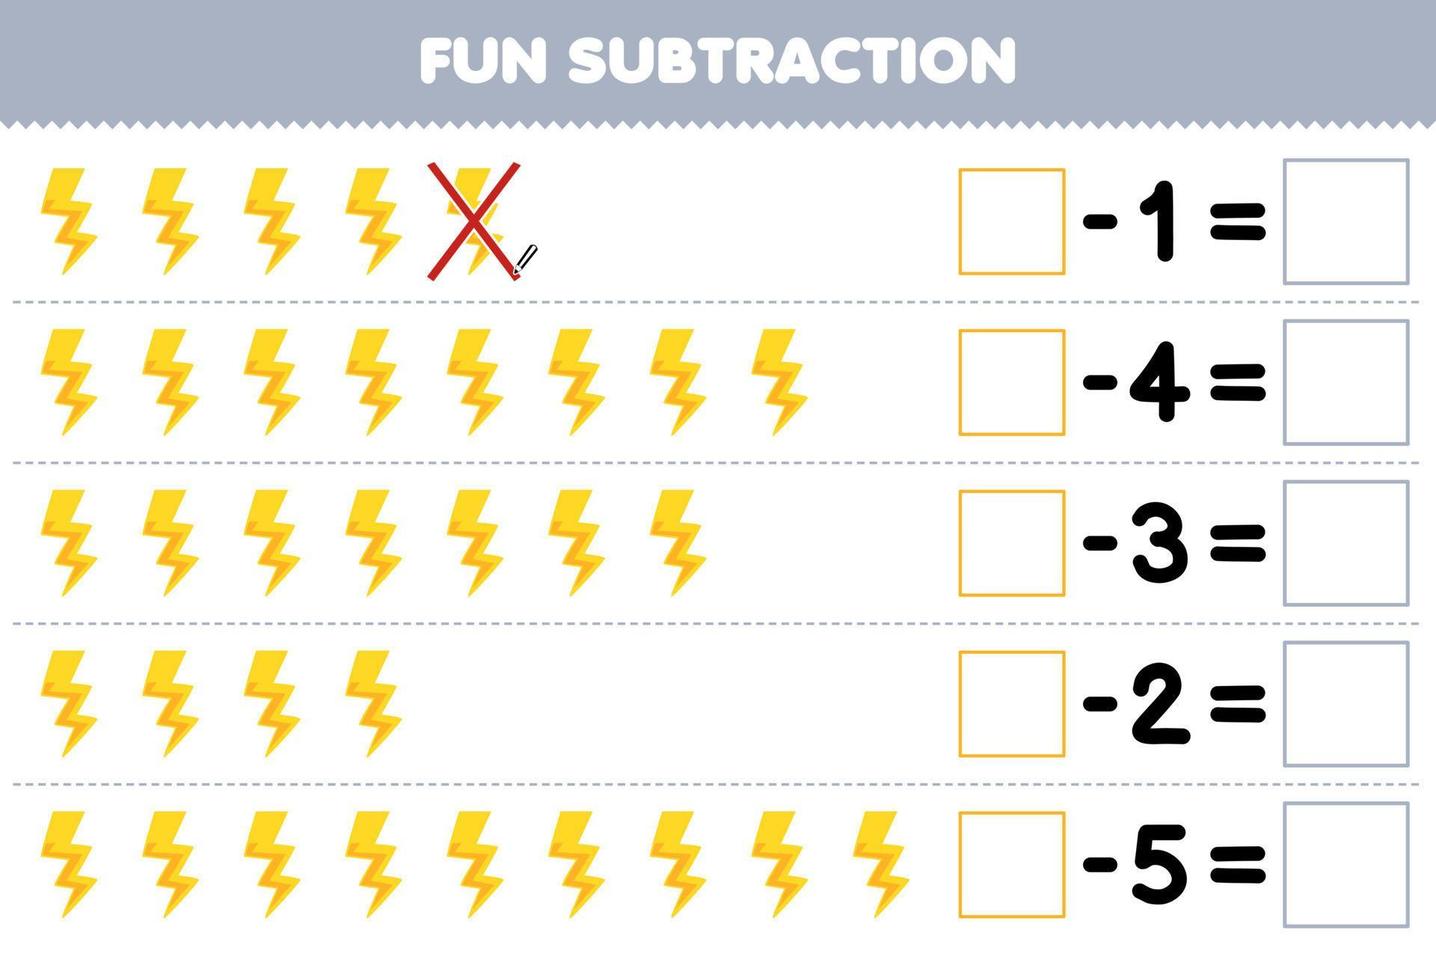 Education game for children fun subtraction by counting cute cartoon thunder each row and eliminating it printable nature worksheet vector